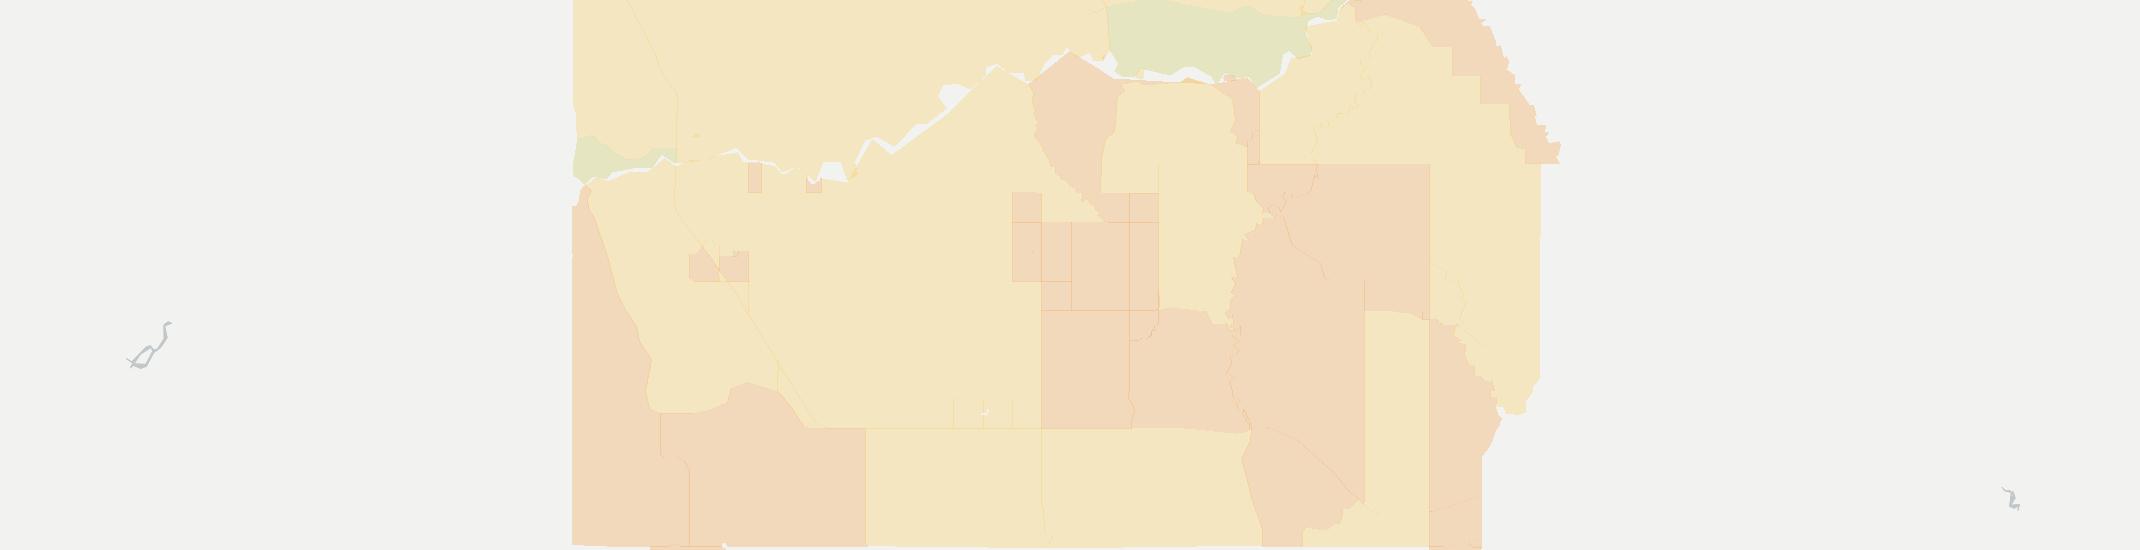 Milesville Internet Competition Map. Click for interactive map.